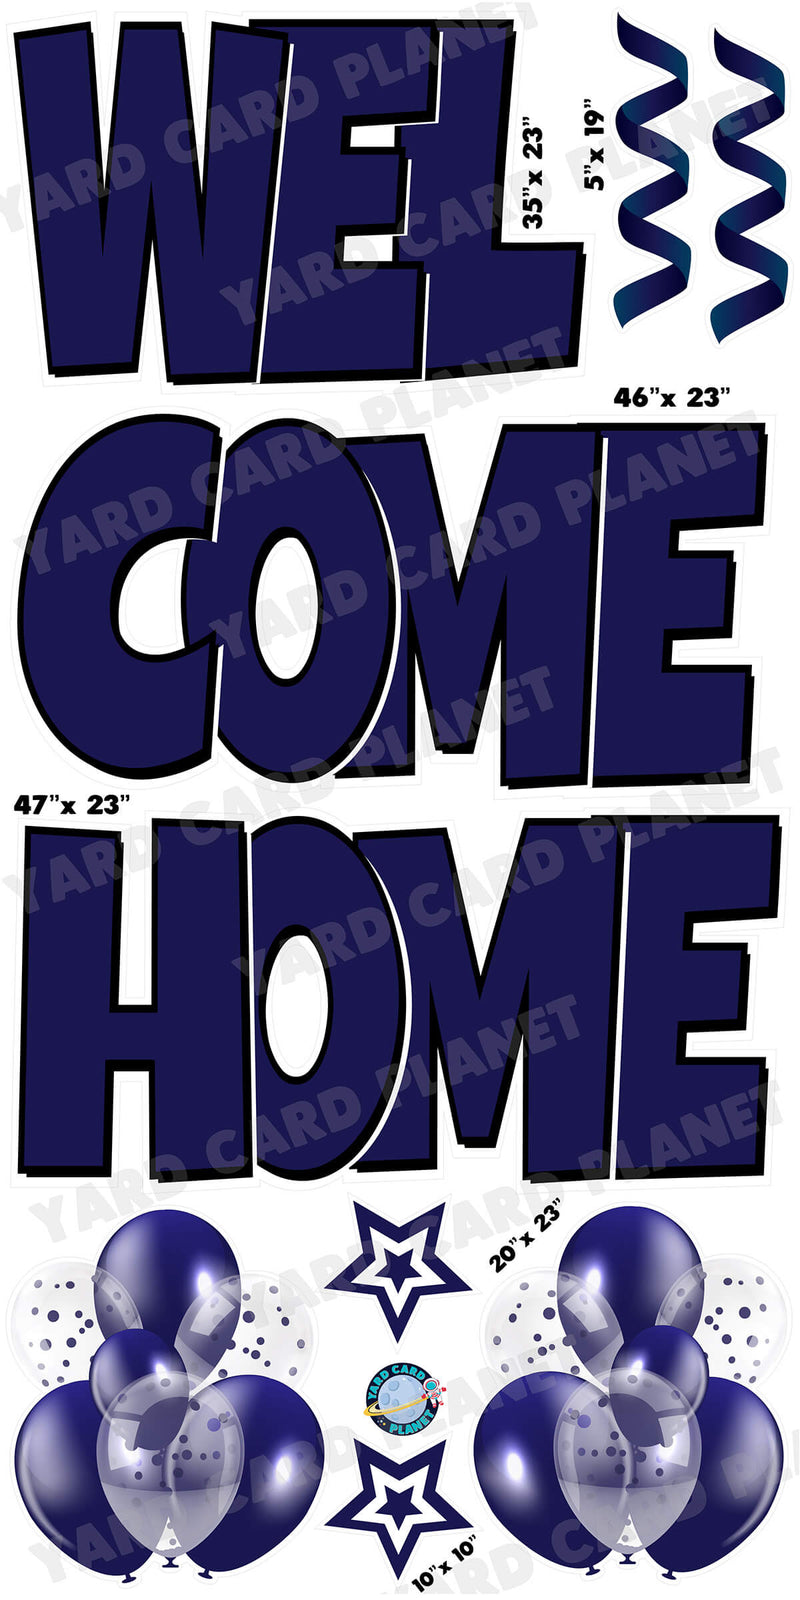 Large 23" Welcome Home Yard Card EZ Quick Sets in Luckiest Guy Font and Flair in Navy Blue Solid Color